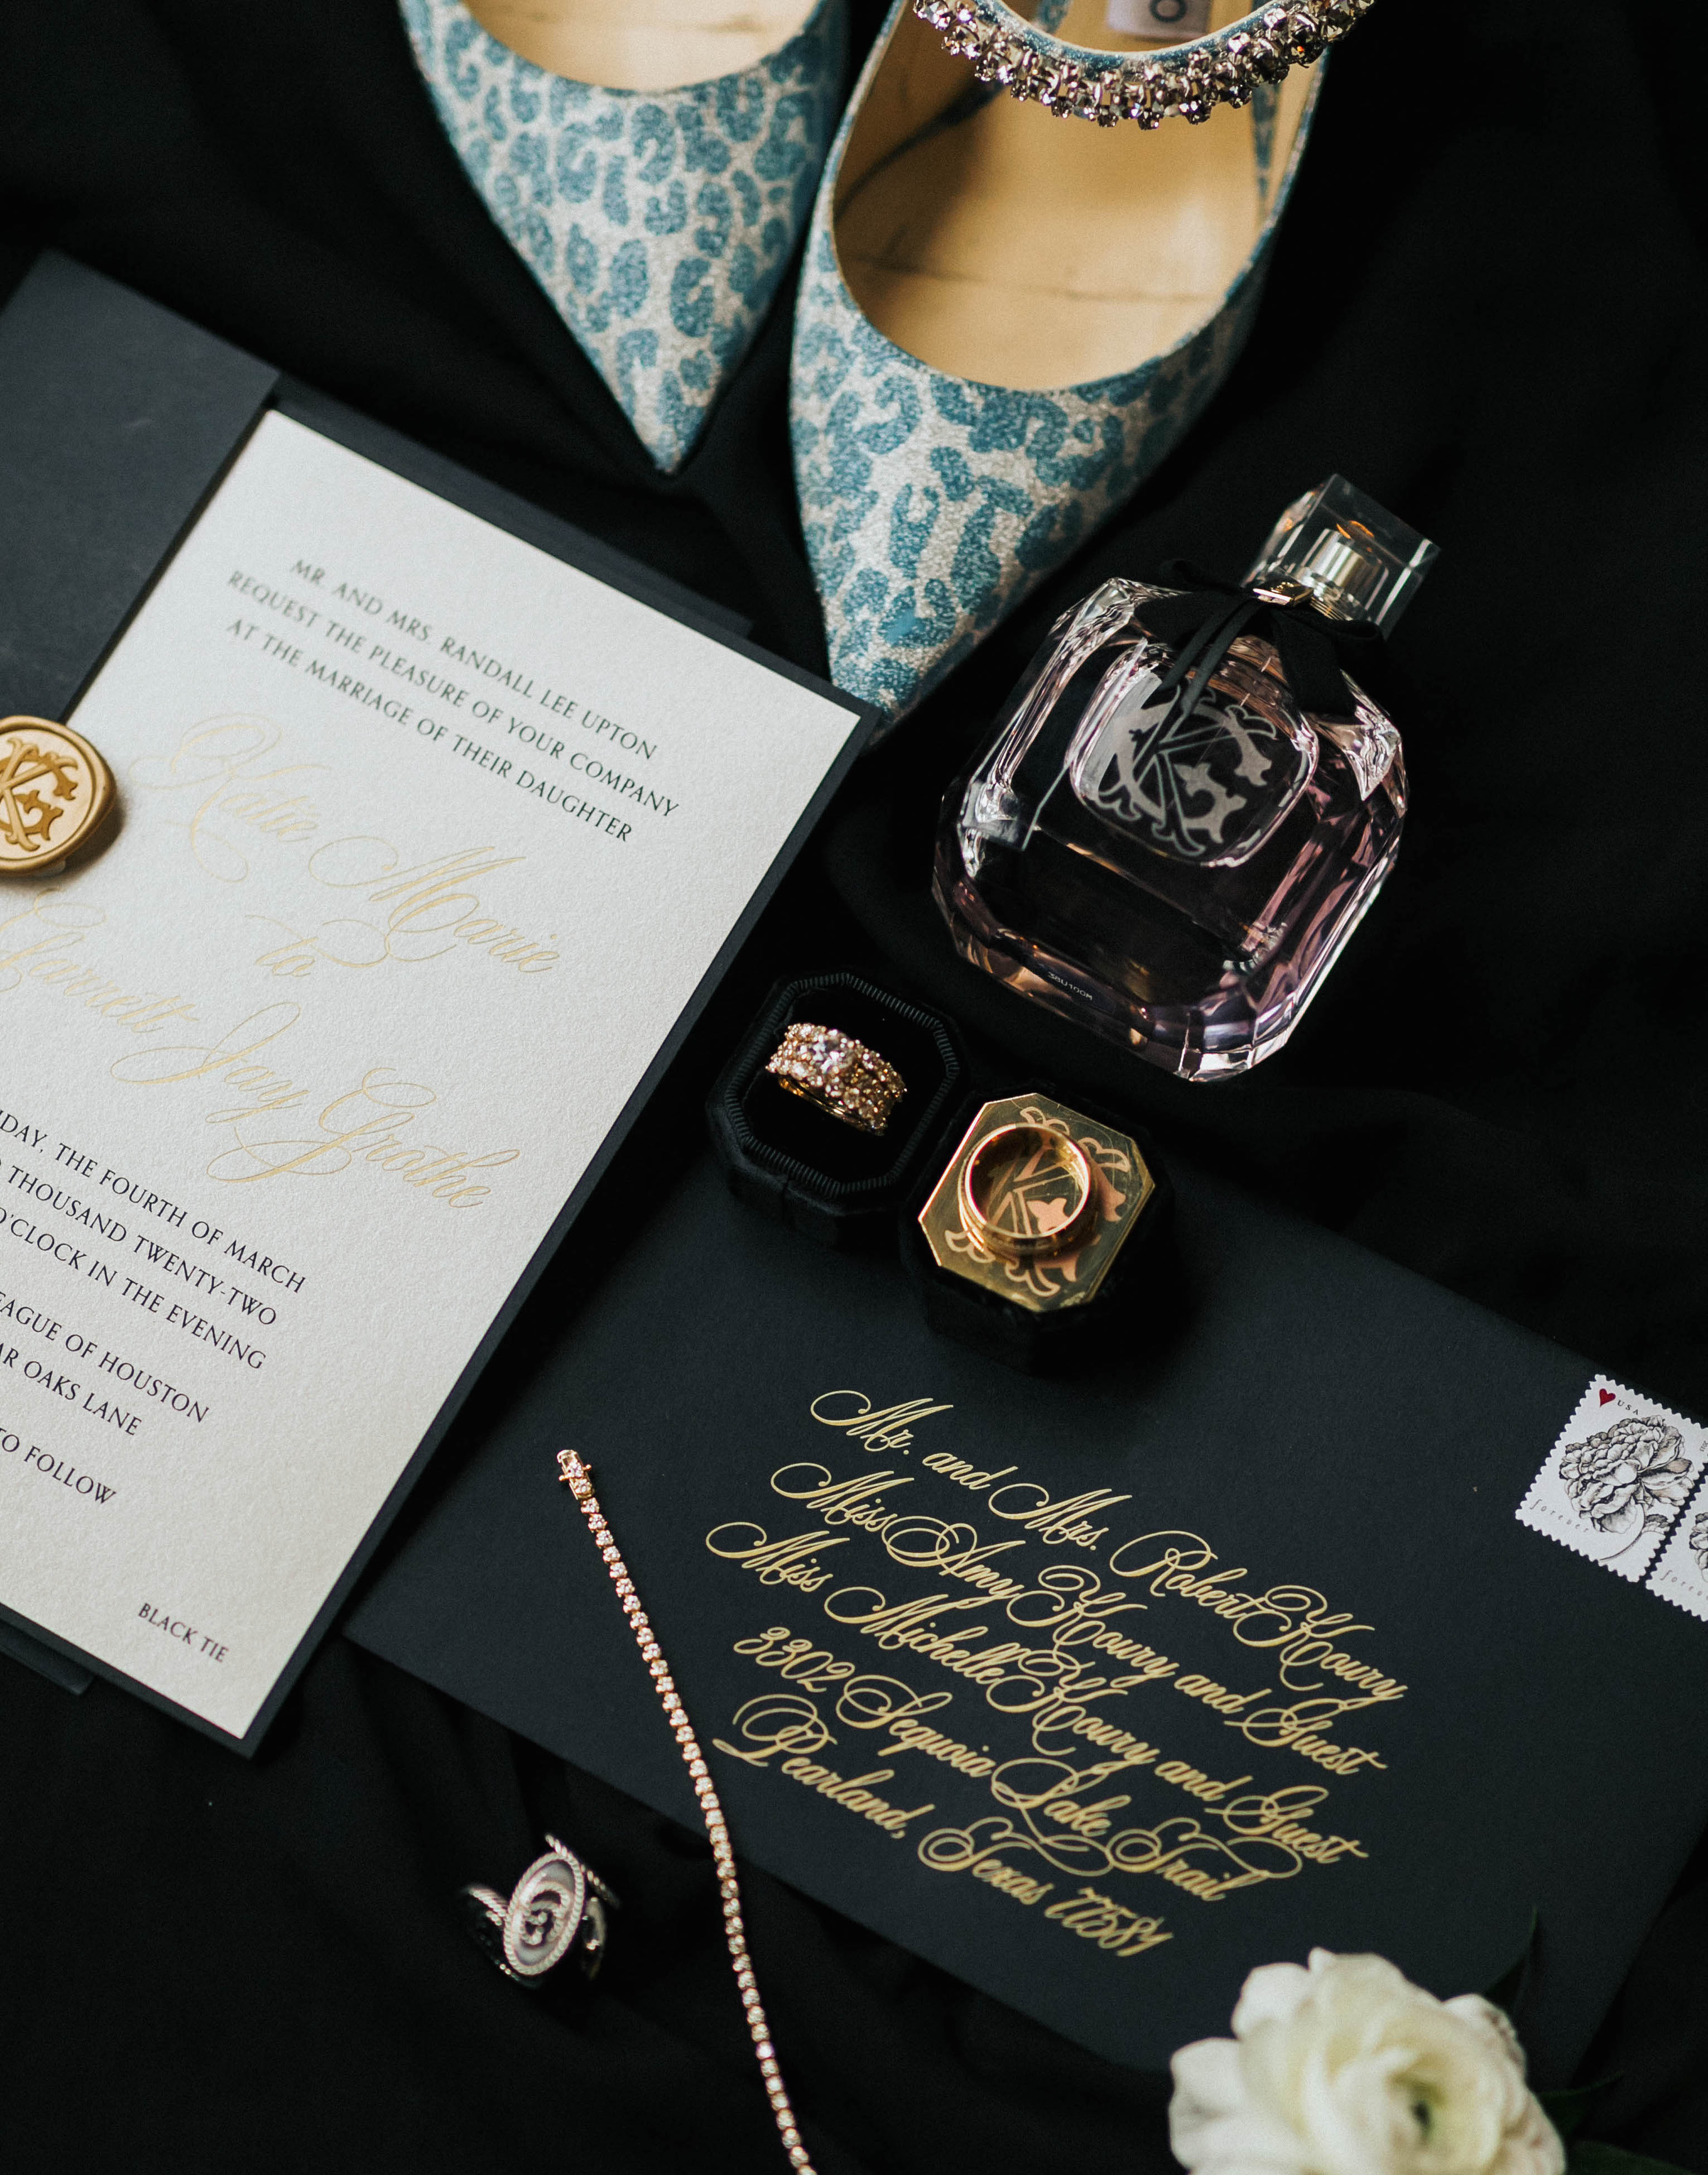 A black wedding invitation suite with a perfume bottle, shoes and wedding bands surrounding the luxury invitations created by Bering's in Houston.